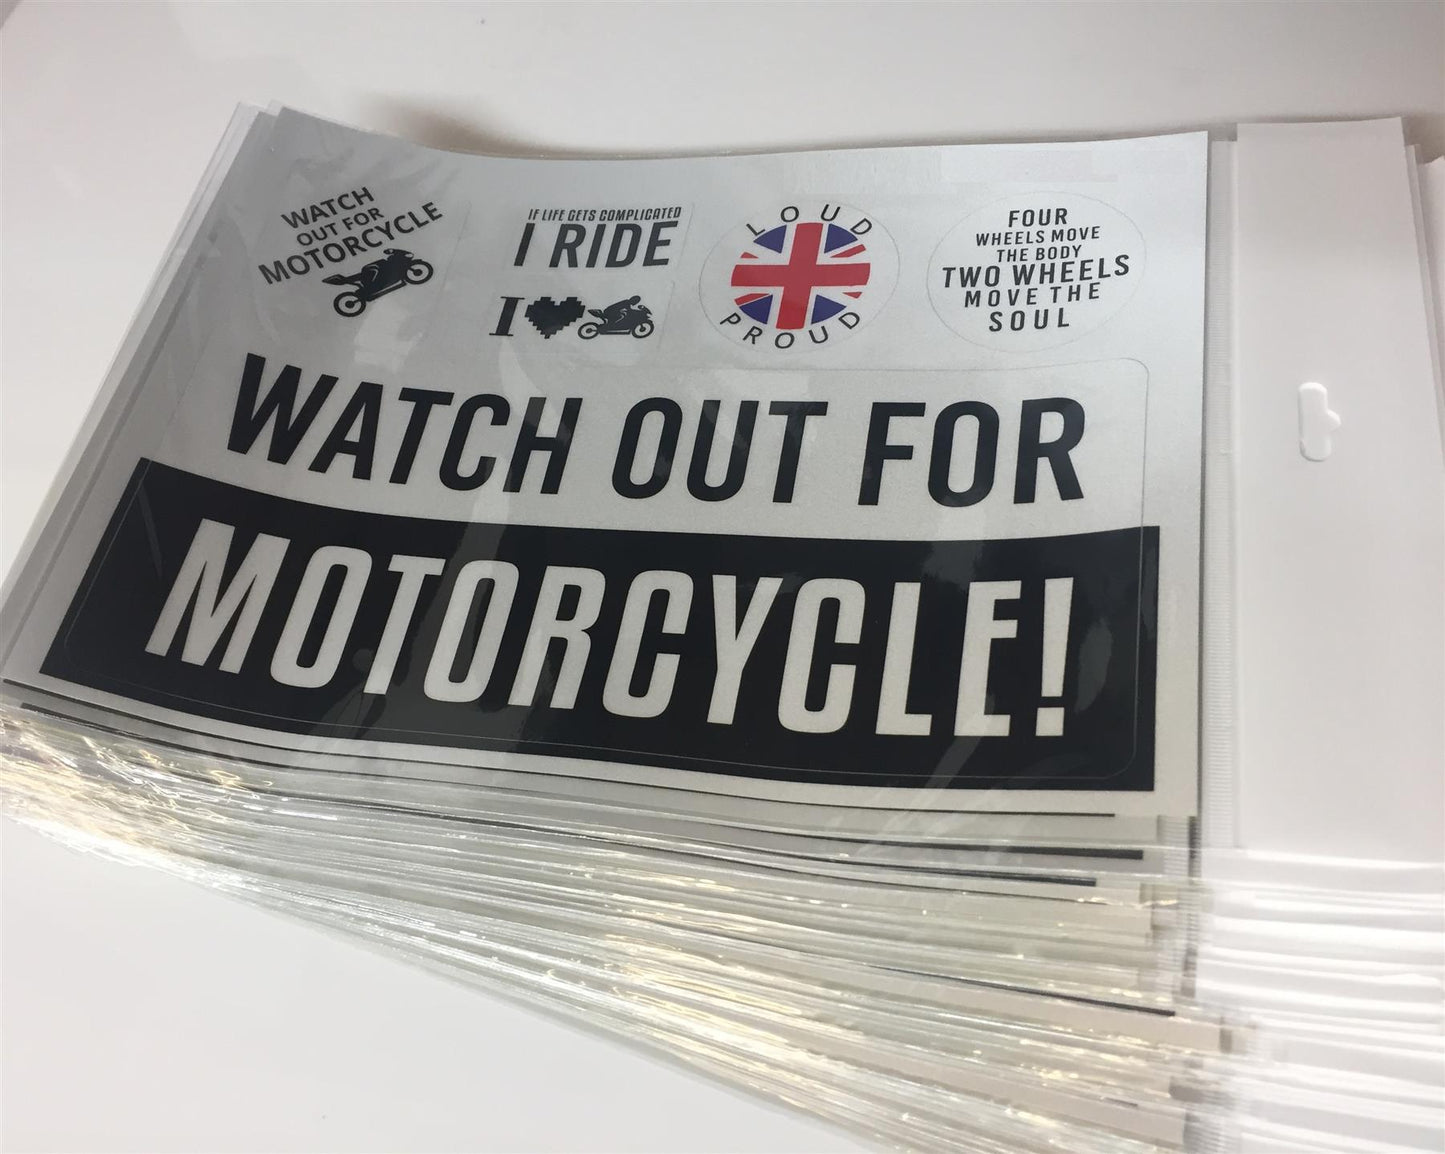 WATCH OUT FOR MOTORCYCLE AND 5 MIX MOTORCYCLE STICKERS DECALS 29X21 CM